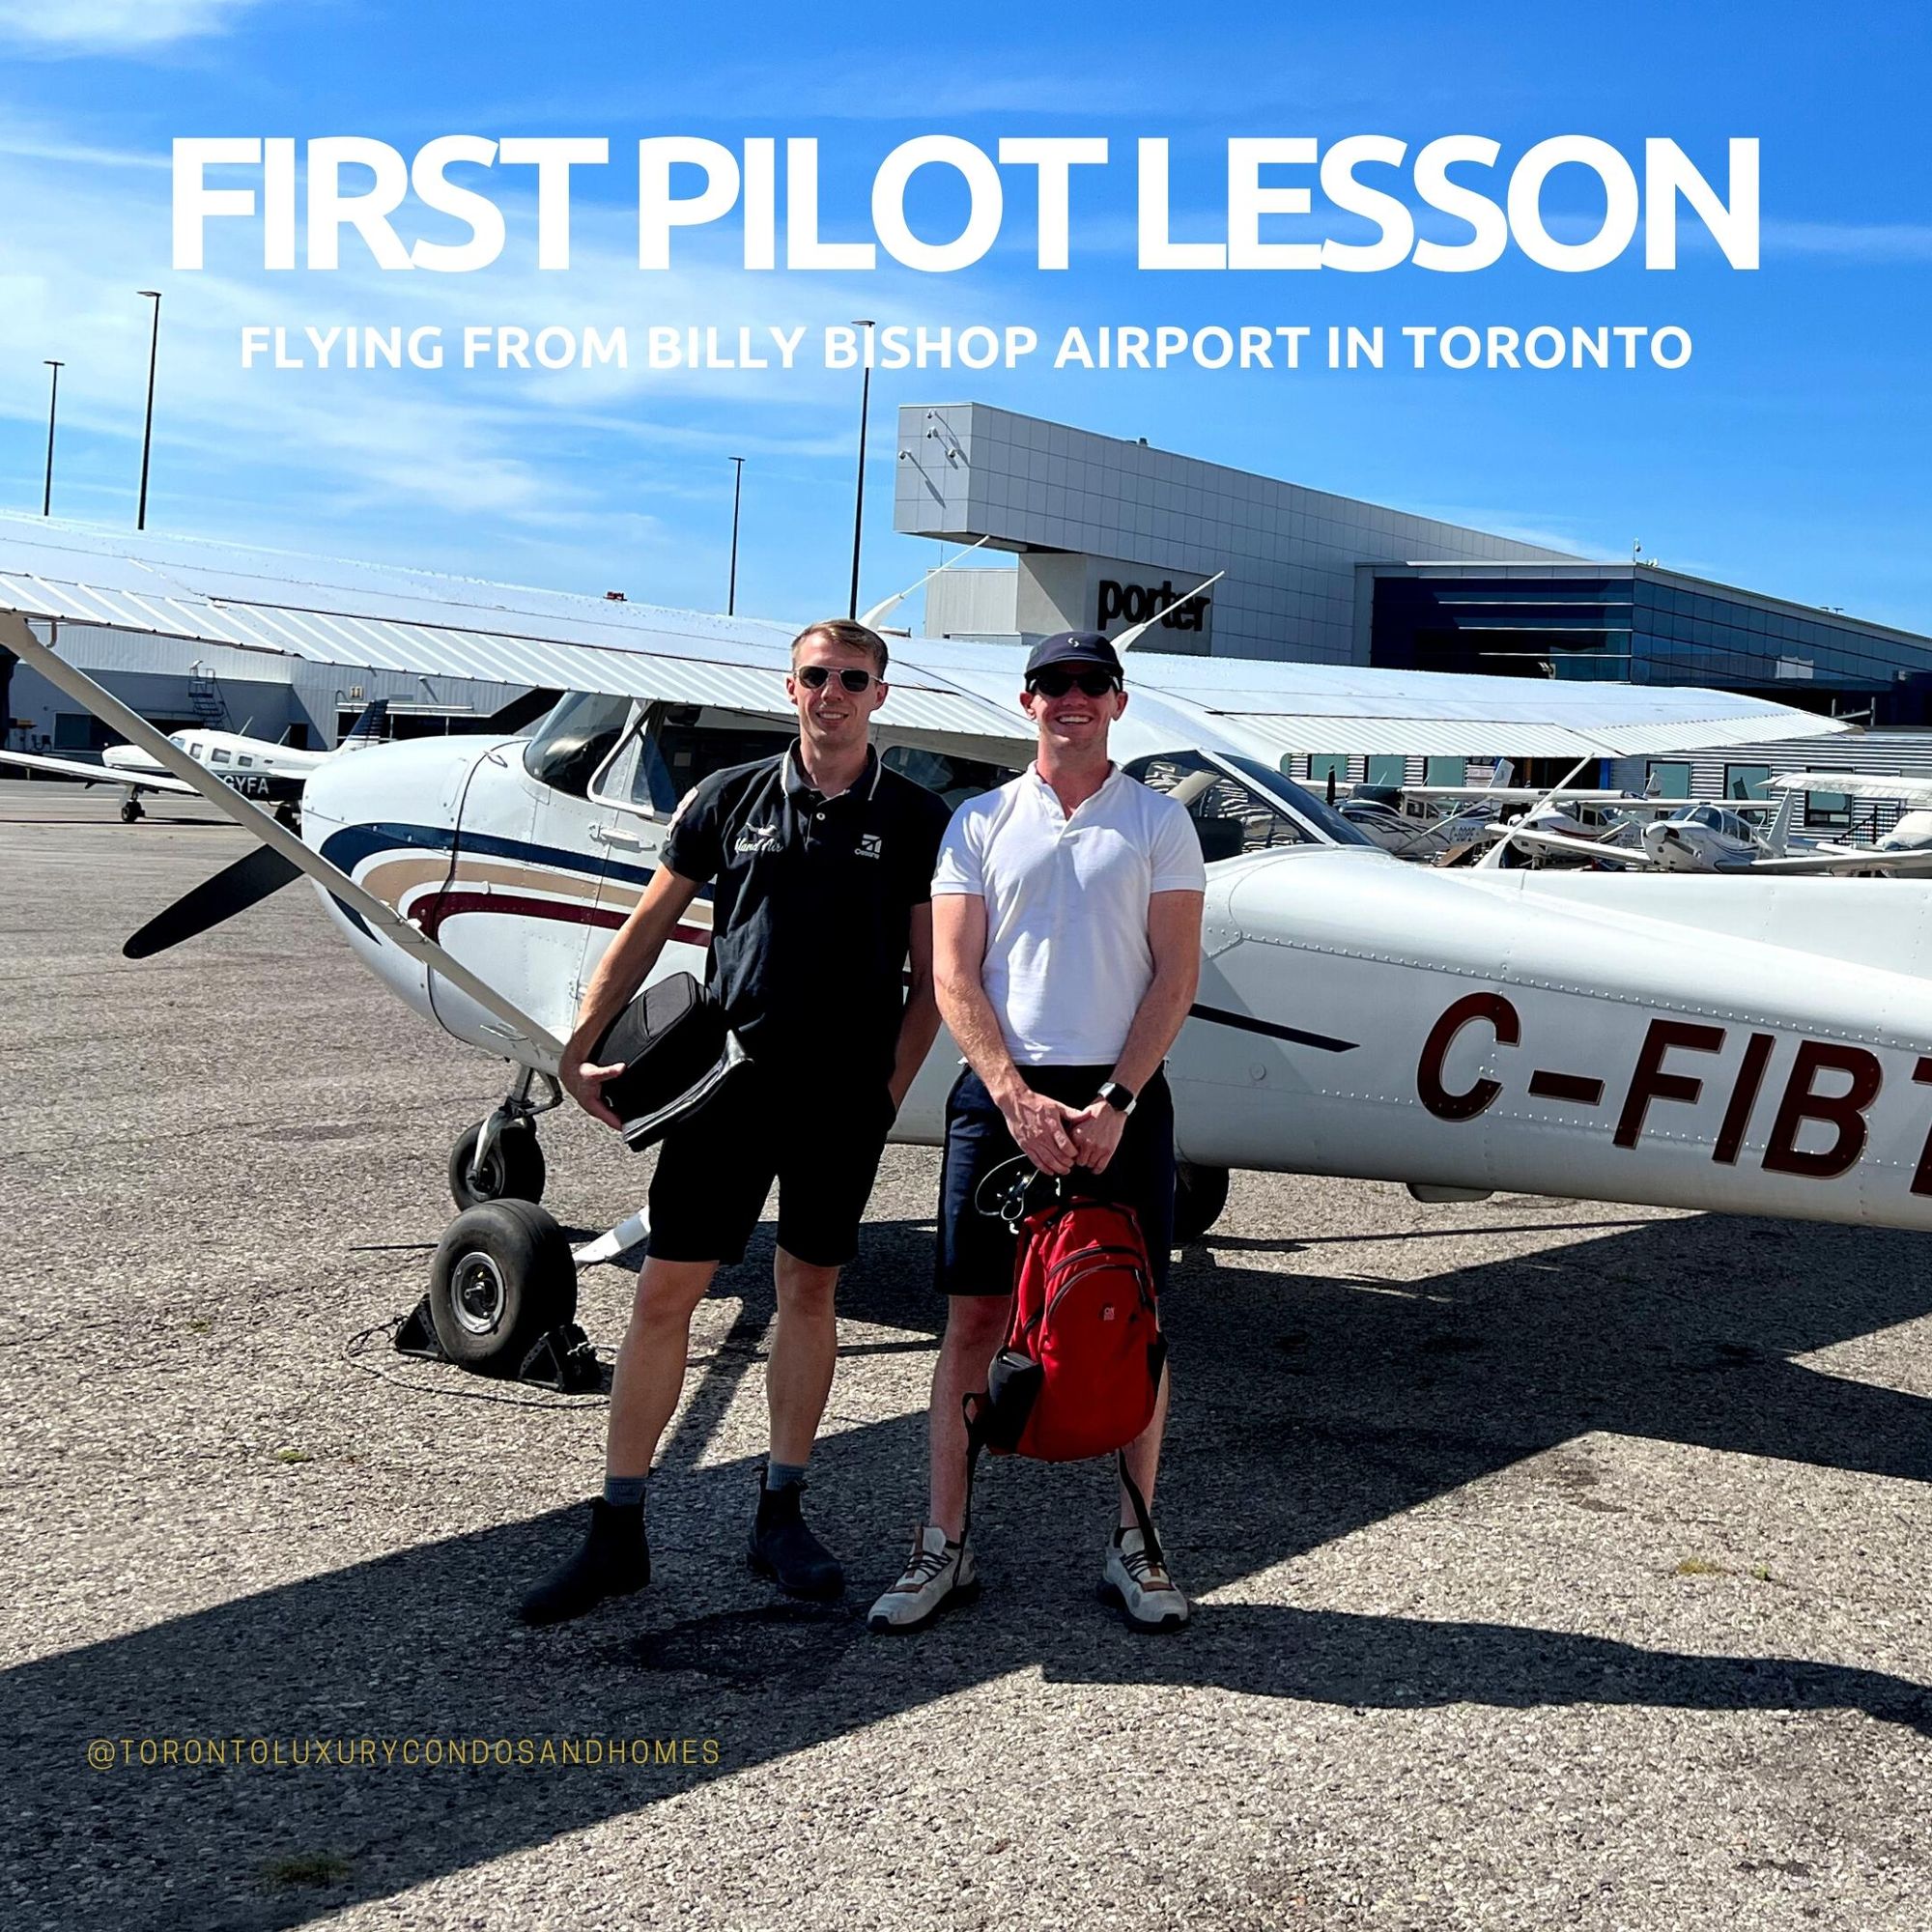 First Pilot Lesson | Flying from Billy Bishop Airport in Toronto